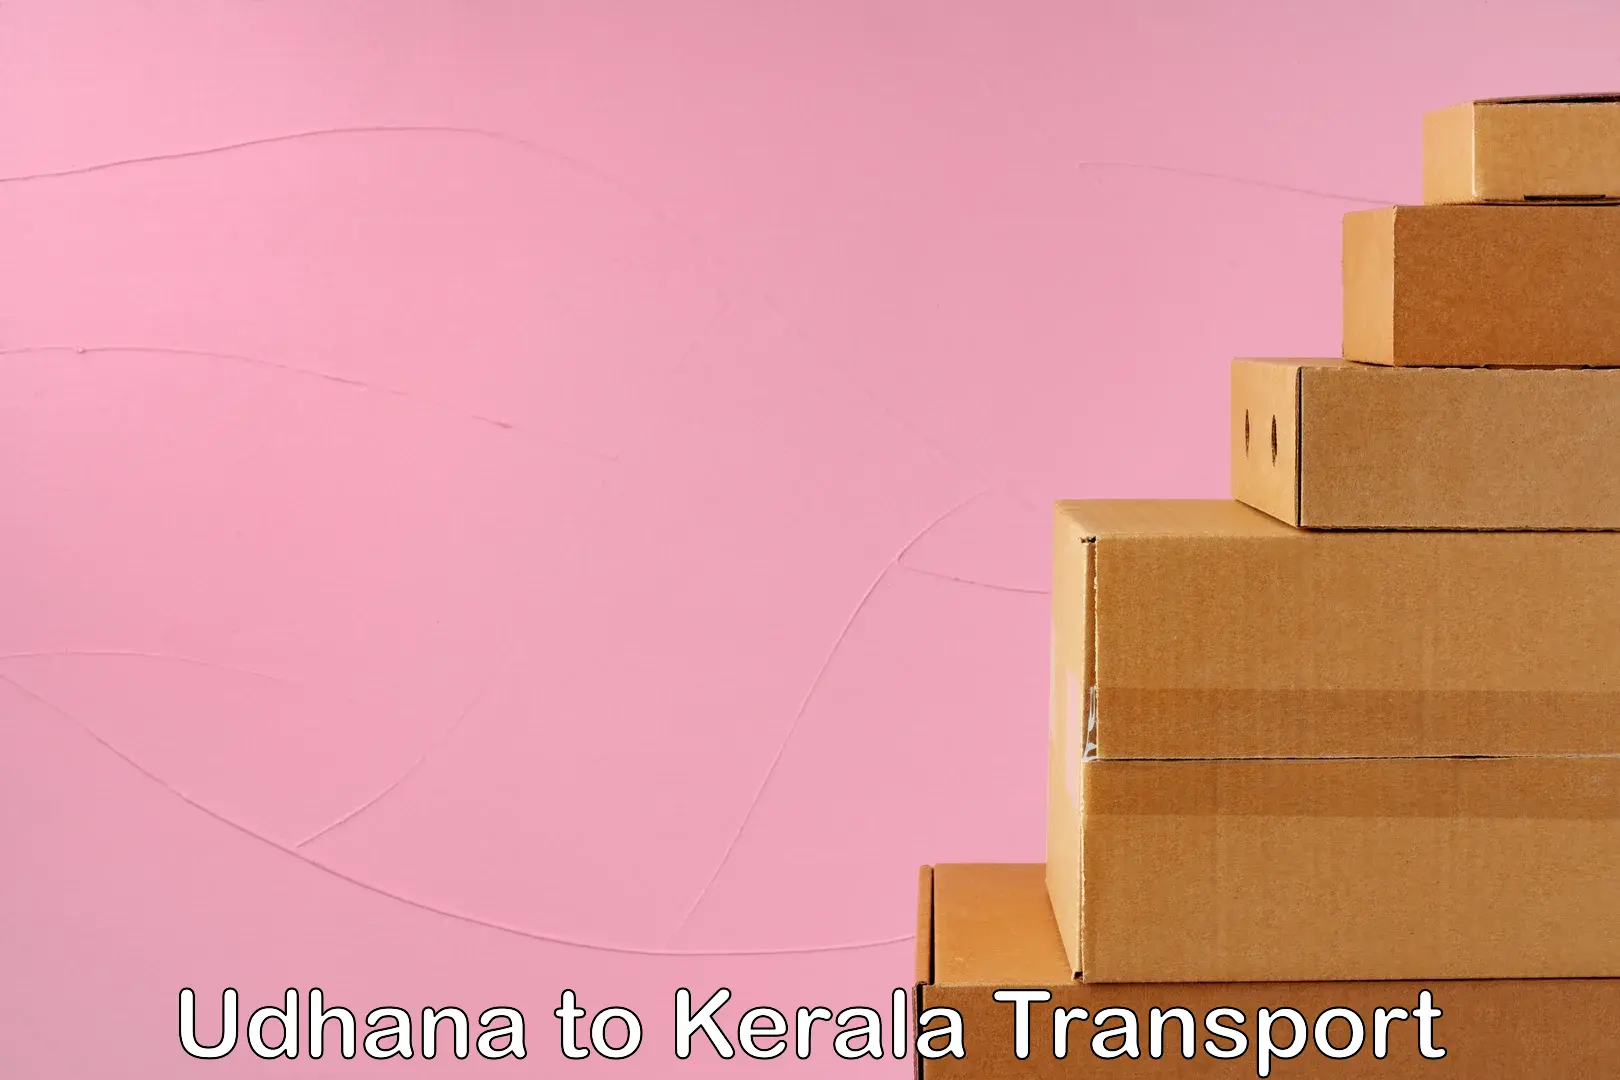 Container transport service Udhana to Kerala